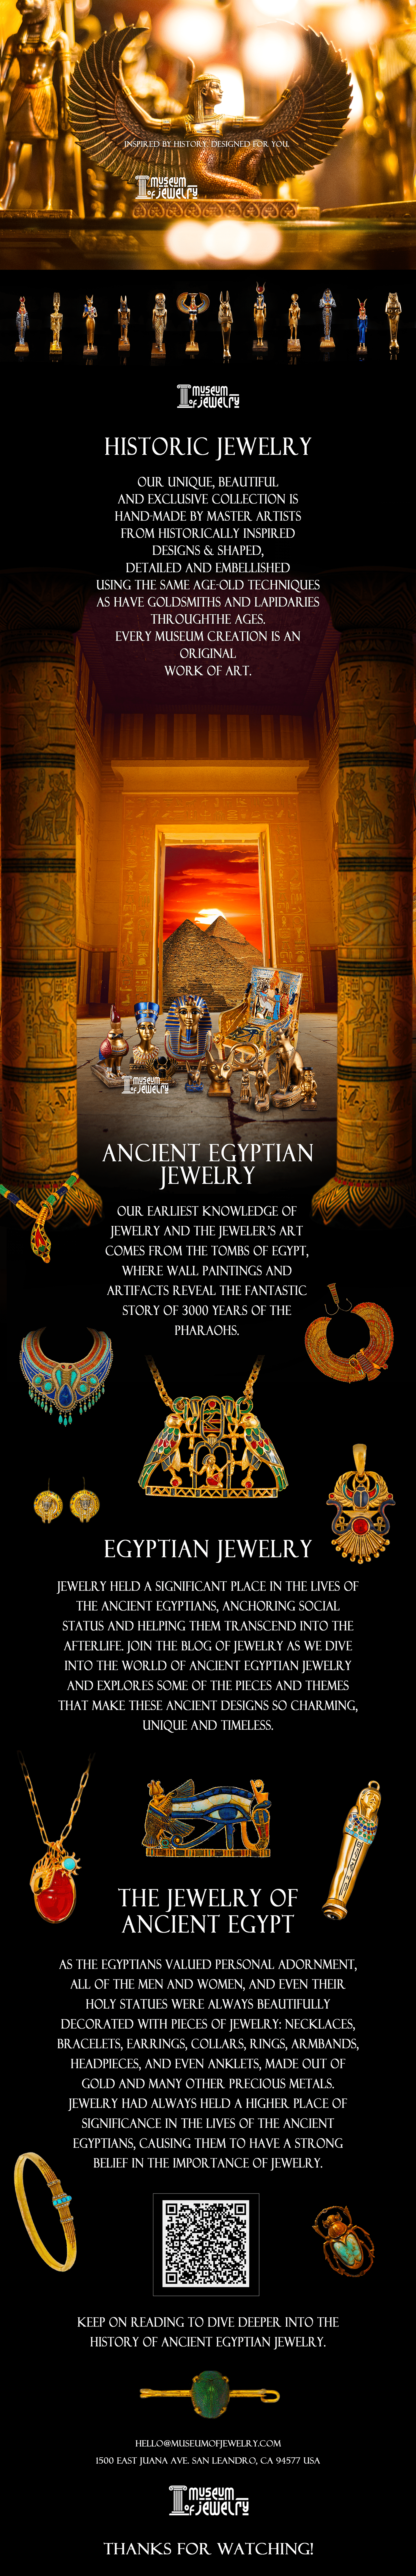 Museum of Jewelry - Ancient Egypt 2022